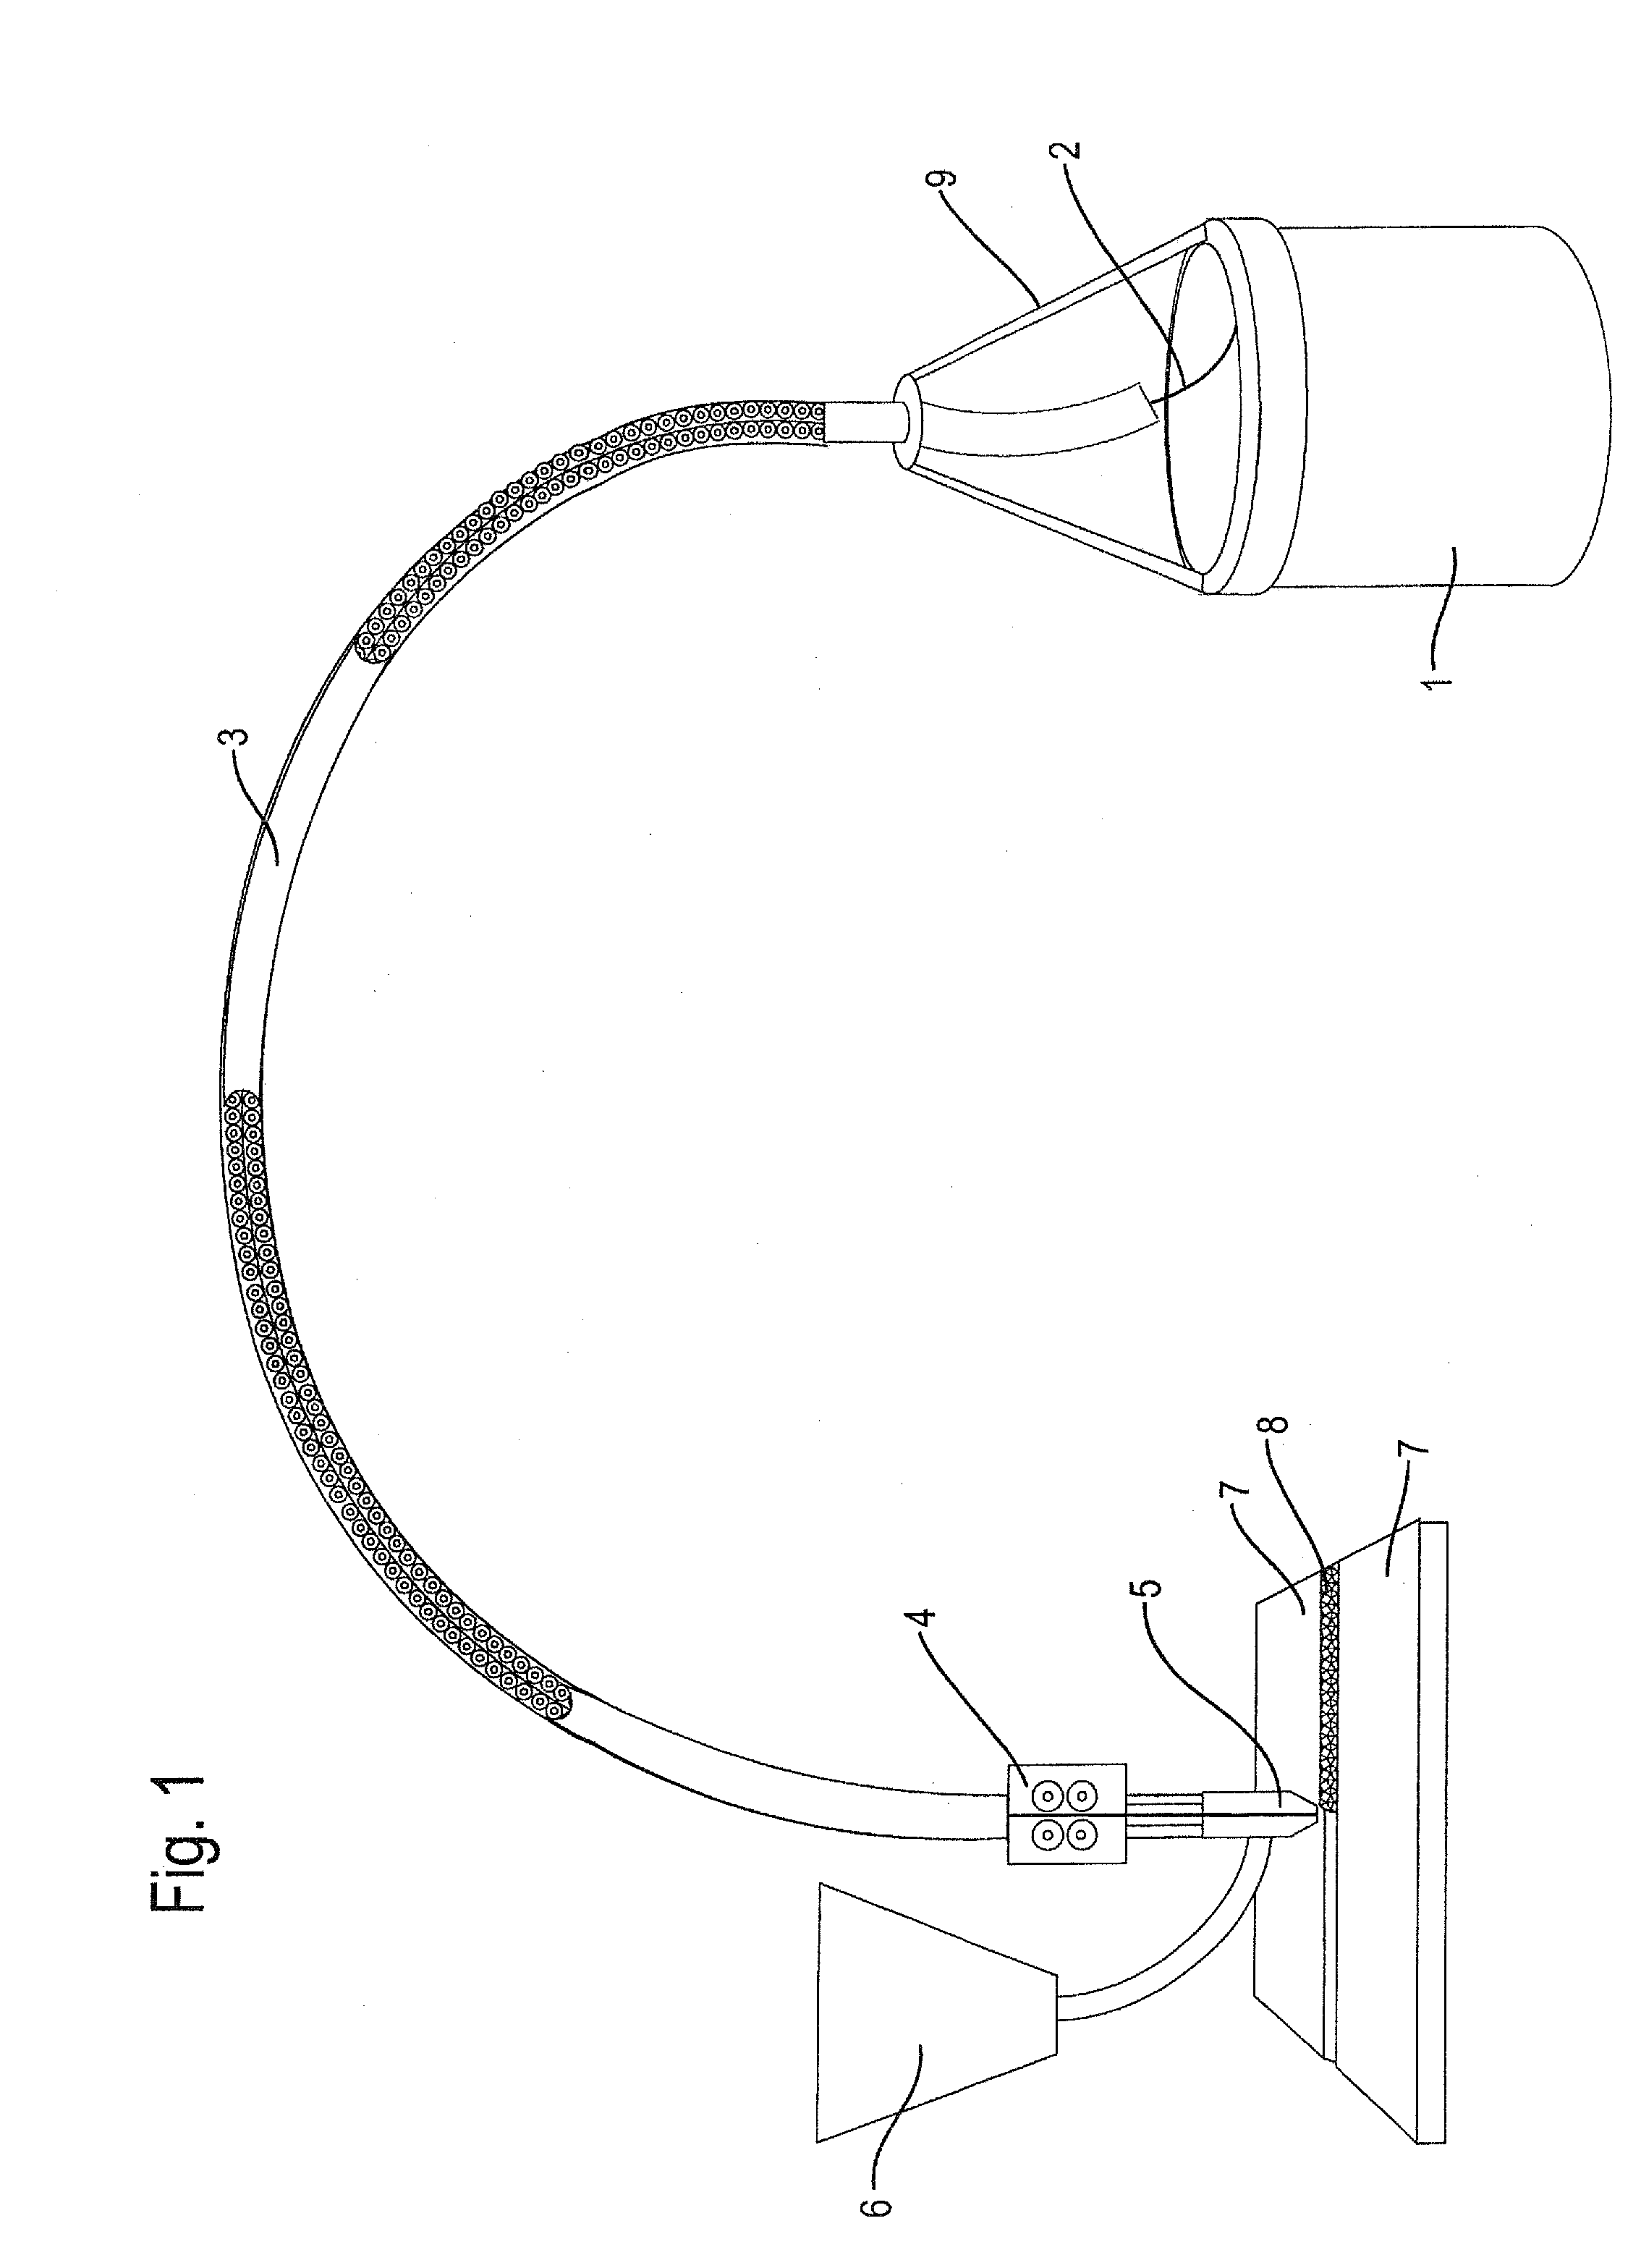 Feeding system for a welding wire for a submerged welding process